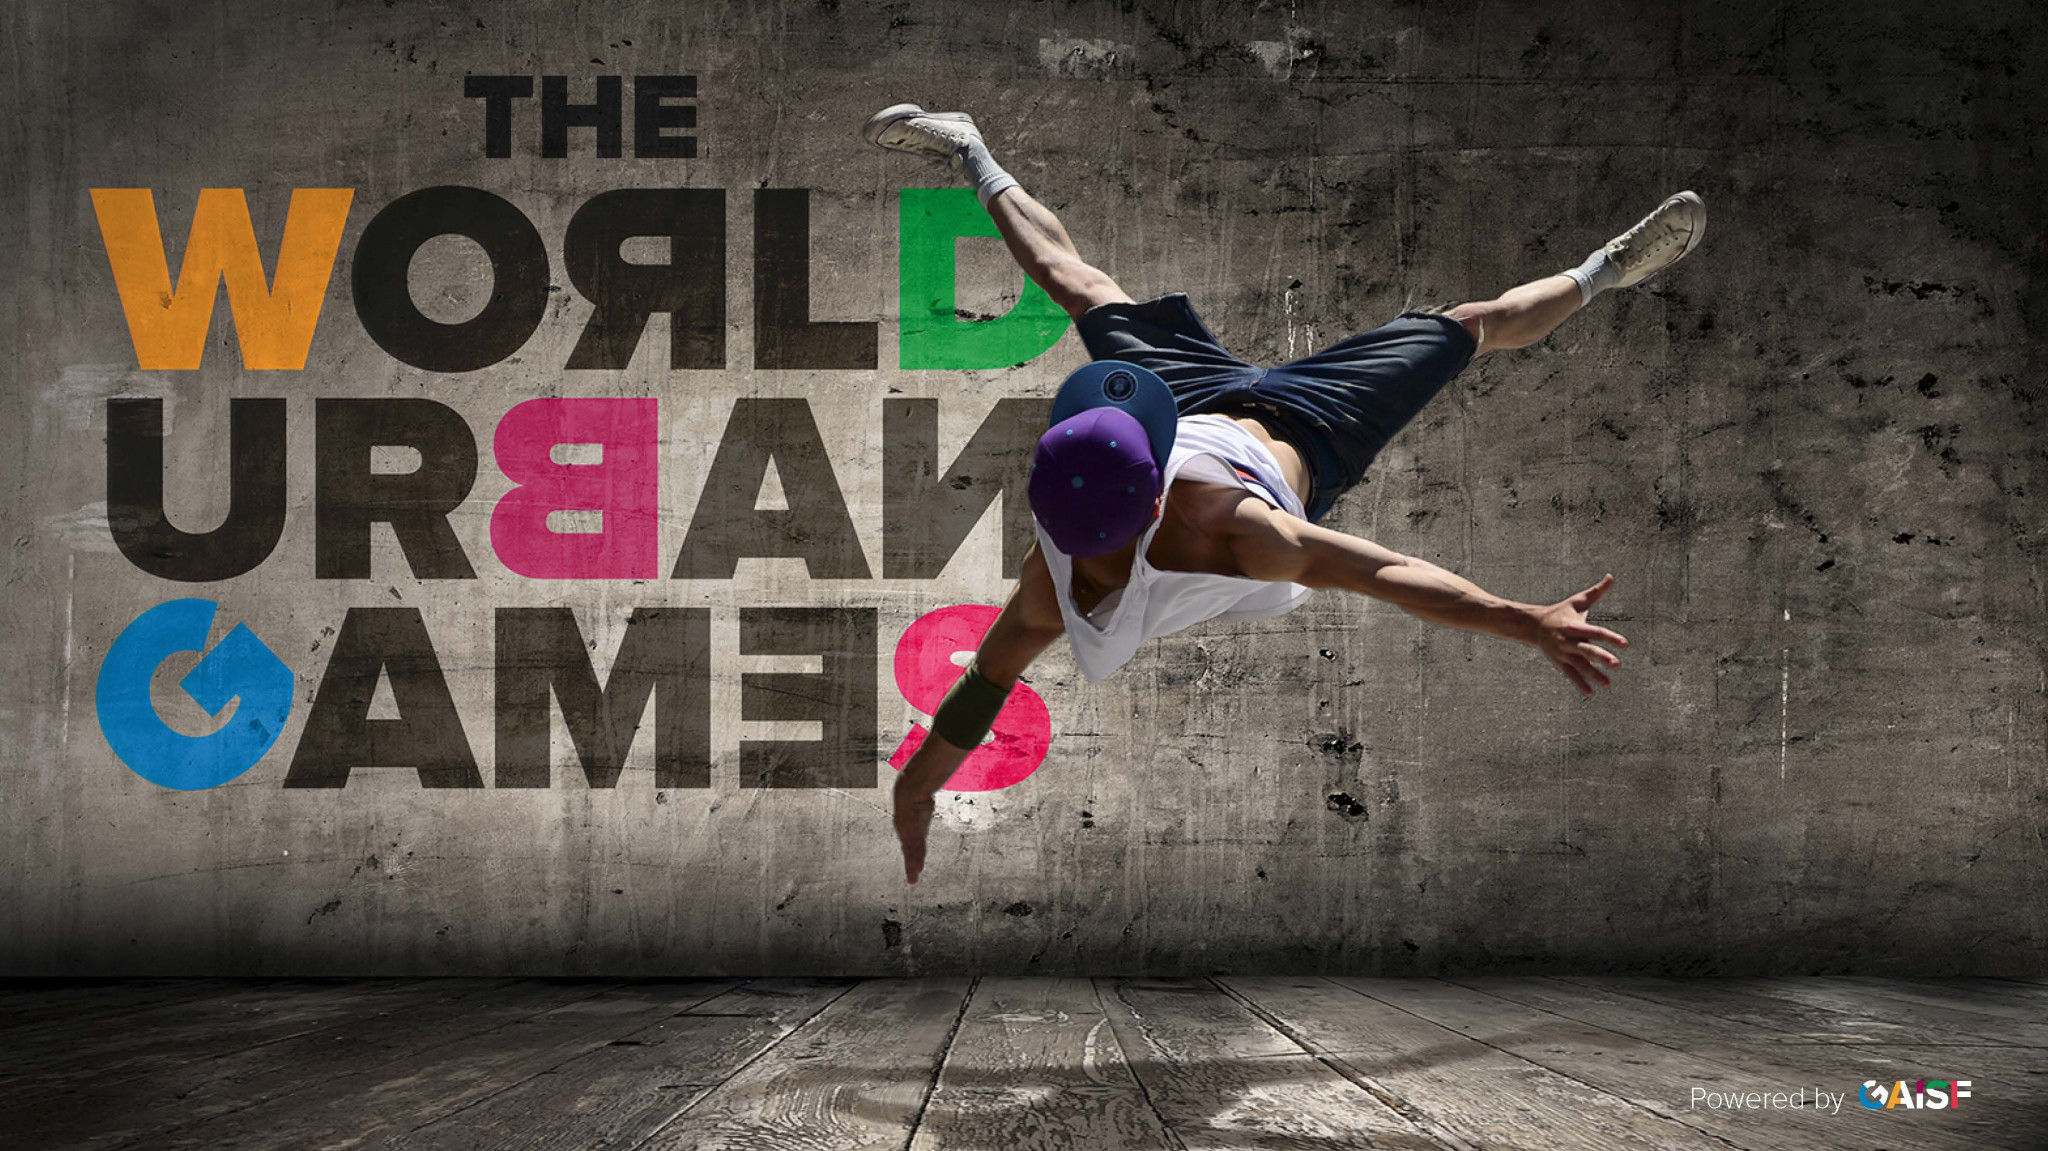 The proposed sports programme for the World Urban Games would include up to 14 disciplines in Olympic and non-Olympic sports, it was revealed today ©World Urban Games